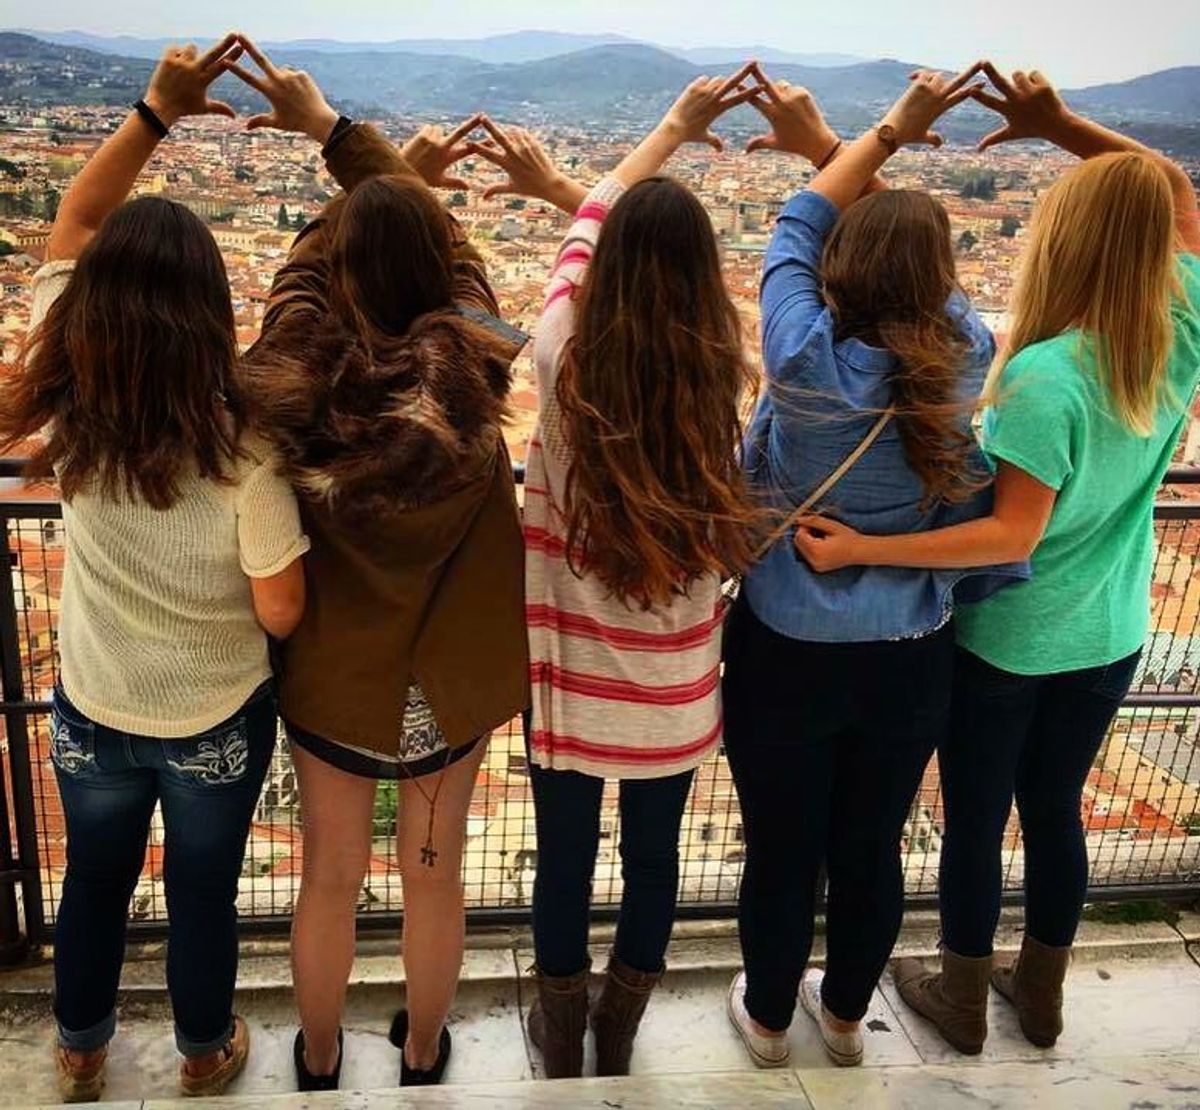 How My Stereotype Of "Greek Life" Has Changed